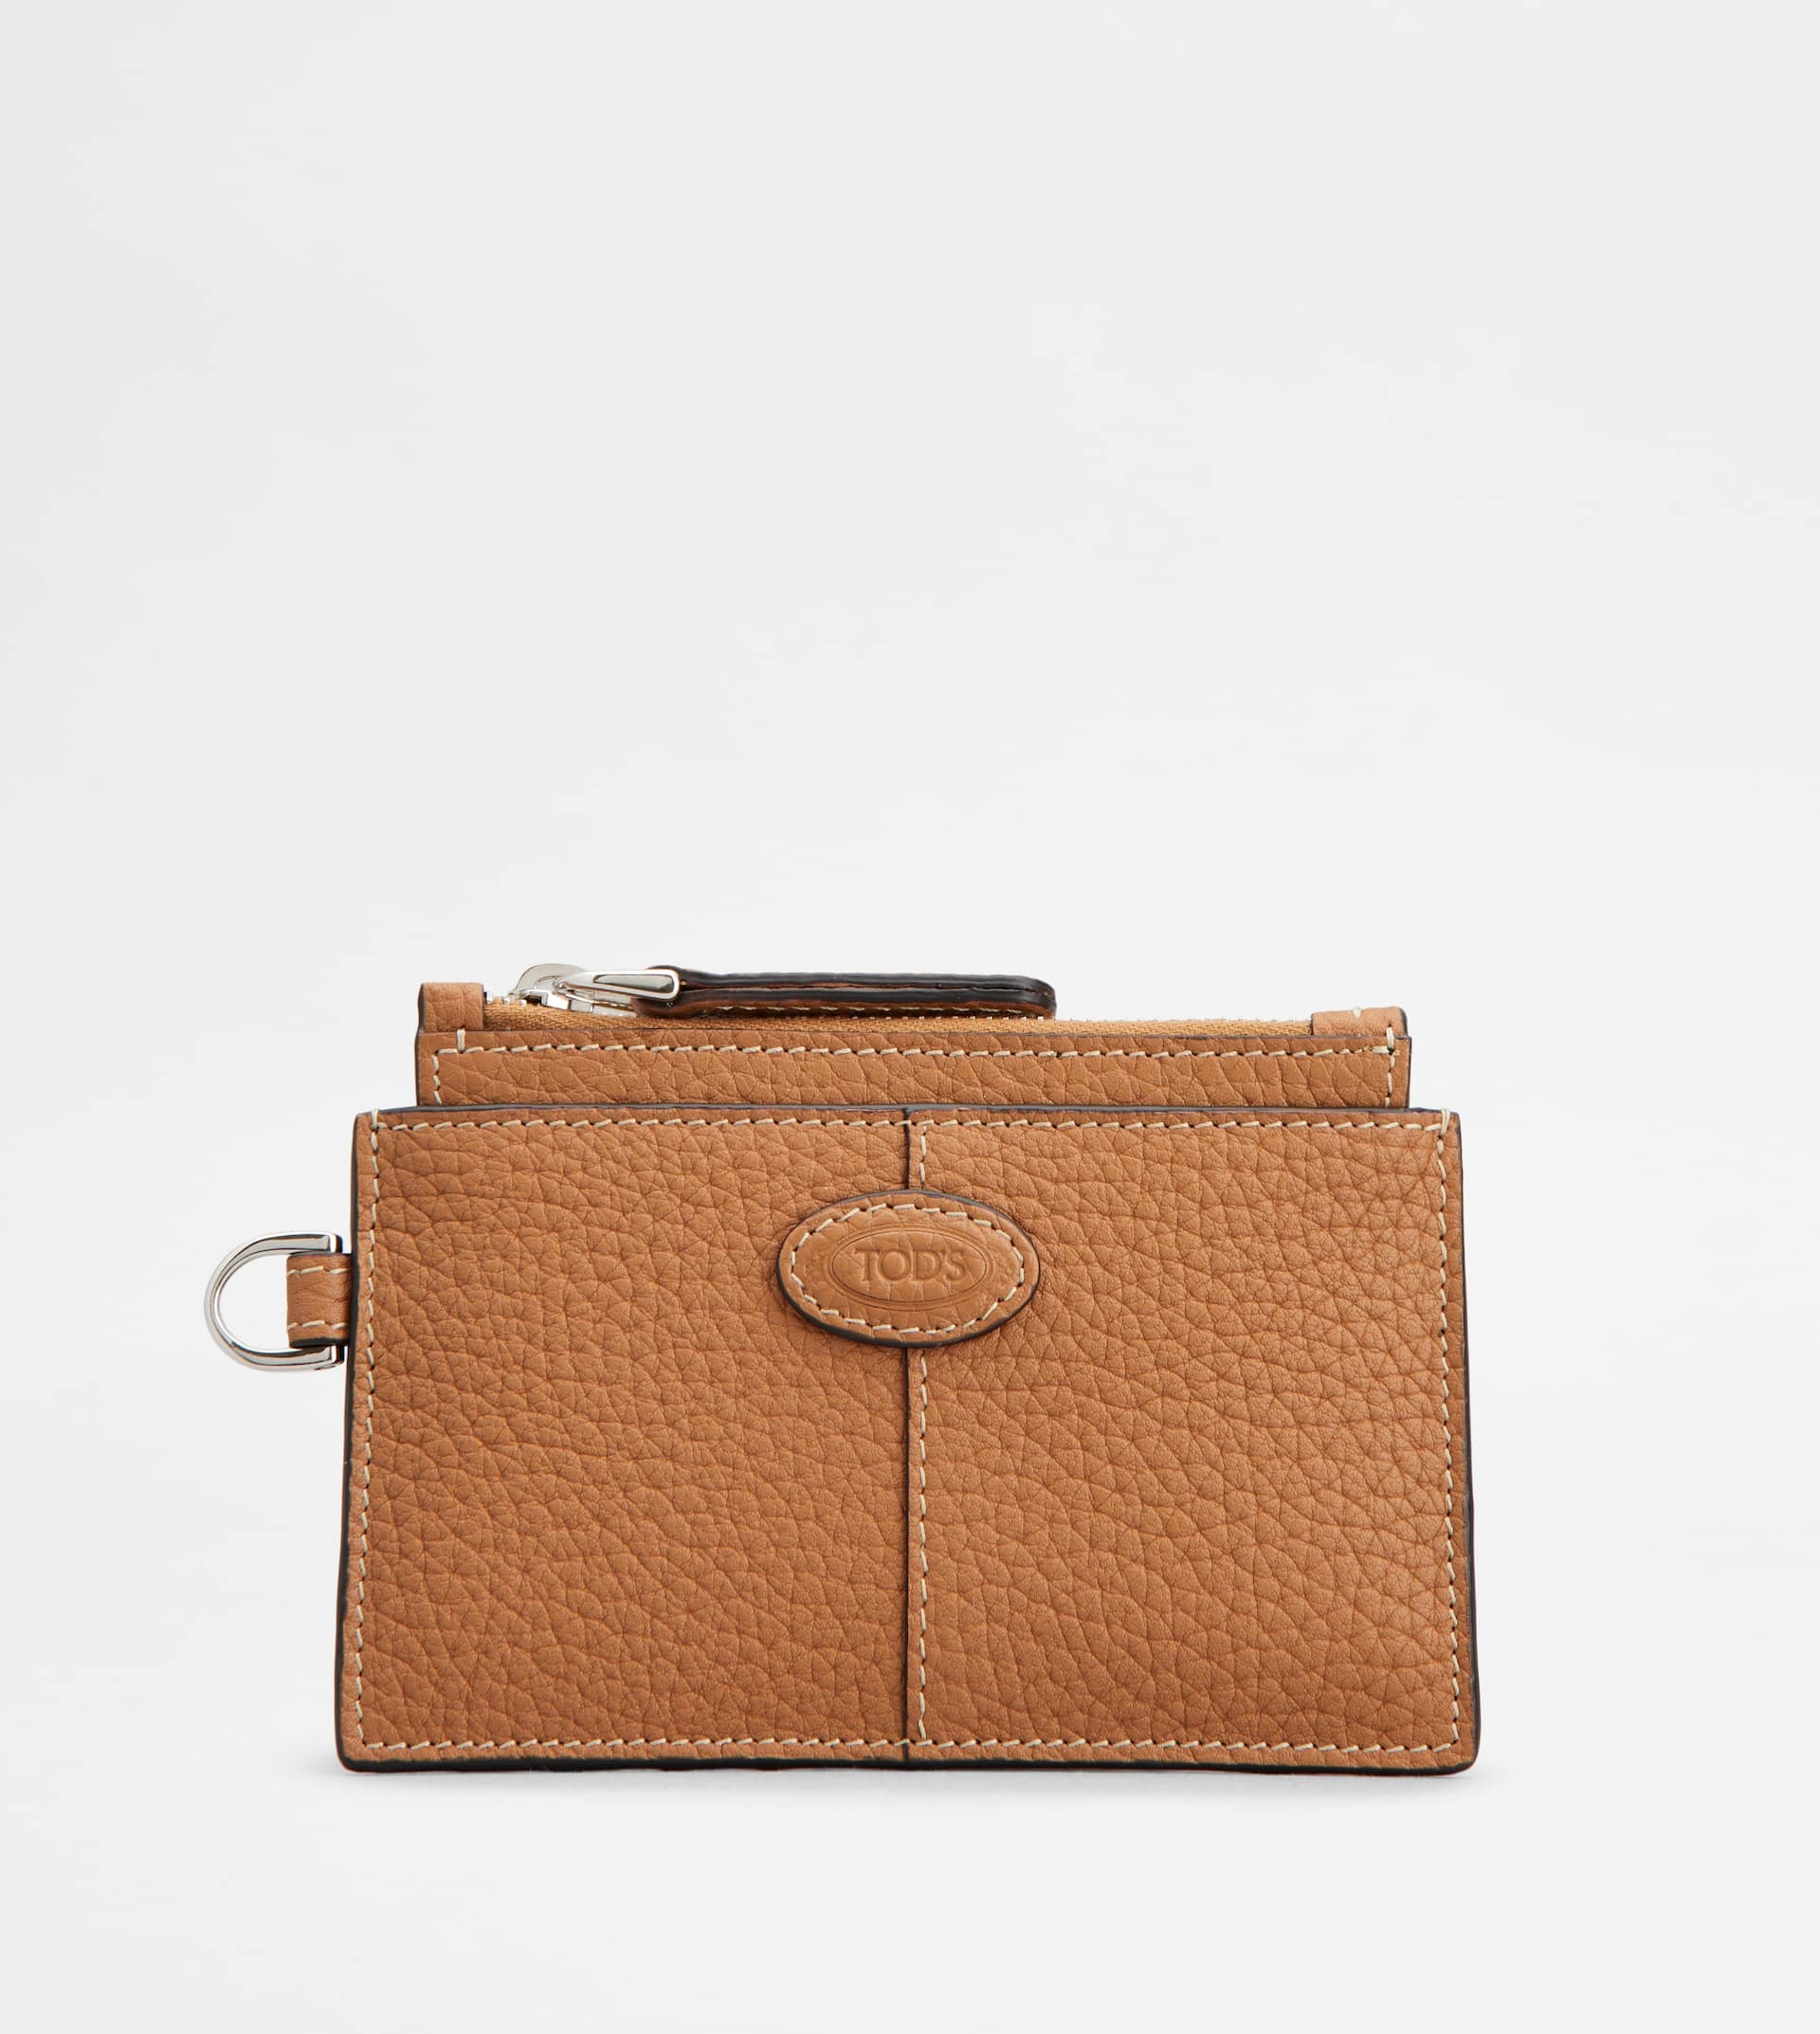 NECK CARD HOLDER IN LEATHER - BROWN - 1